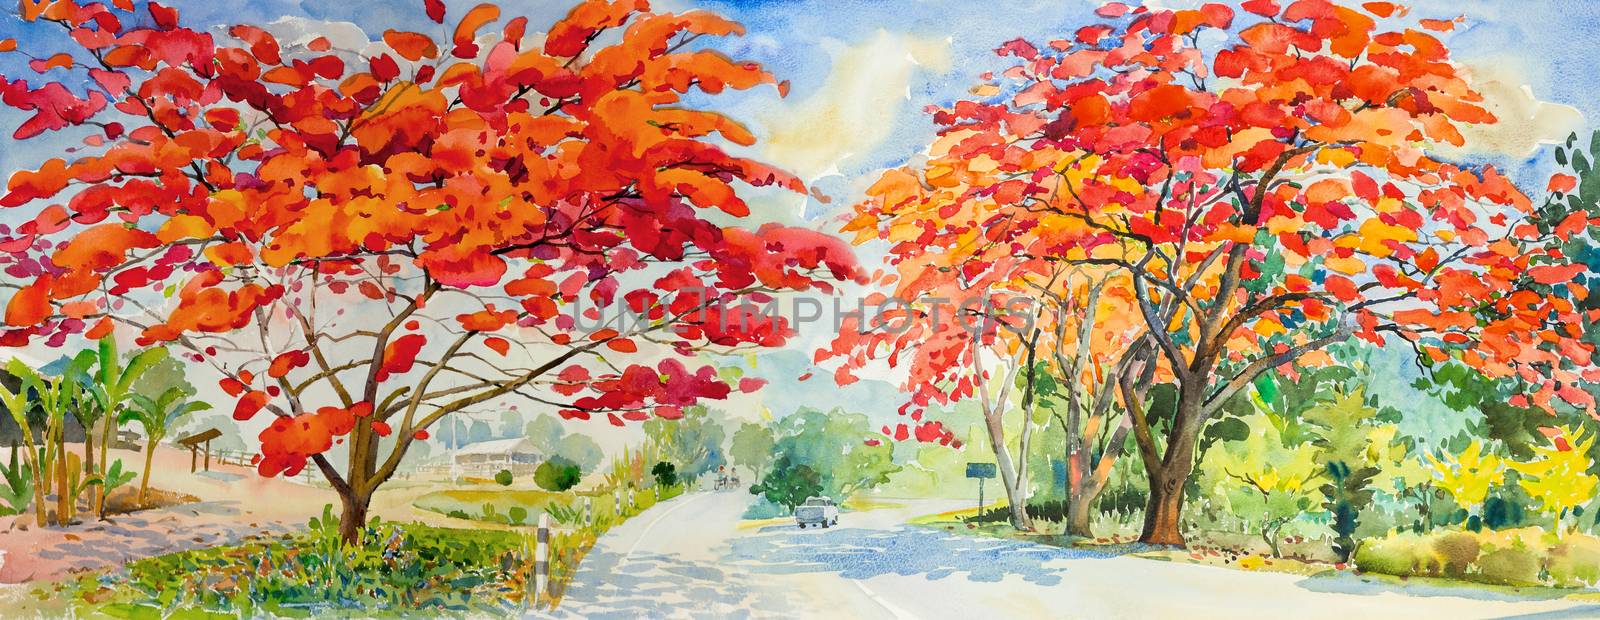 Painting waterlcolor landscape original colorful of red peacock flower tree roadside in environment rural society with cloud in the sky background.